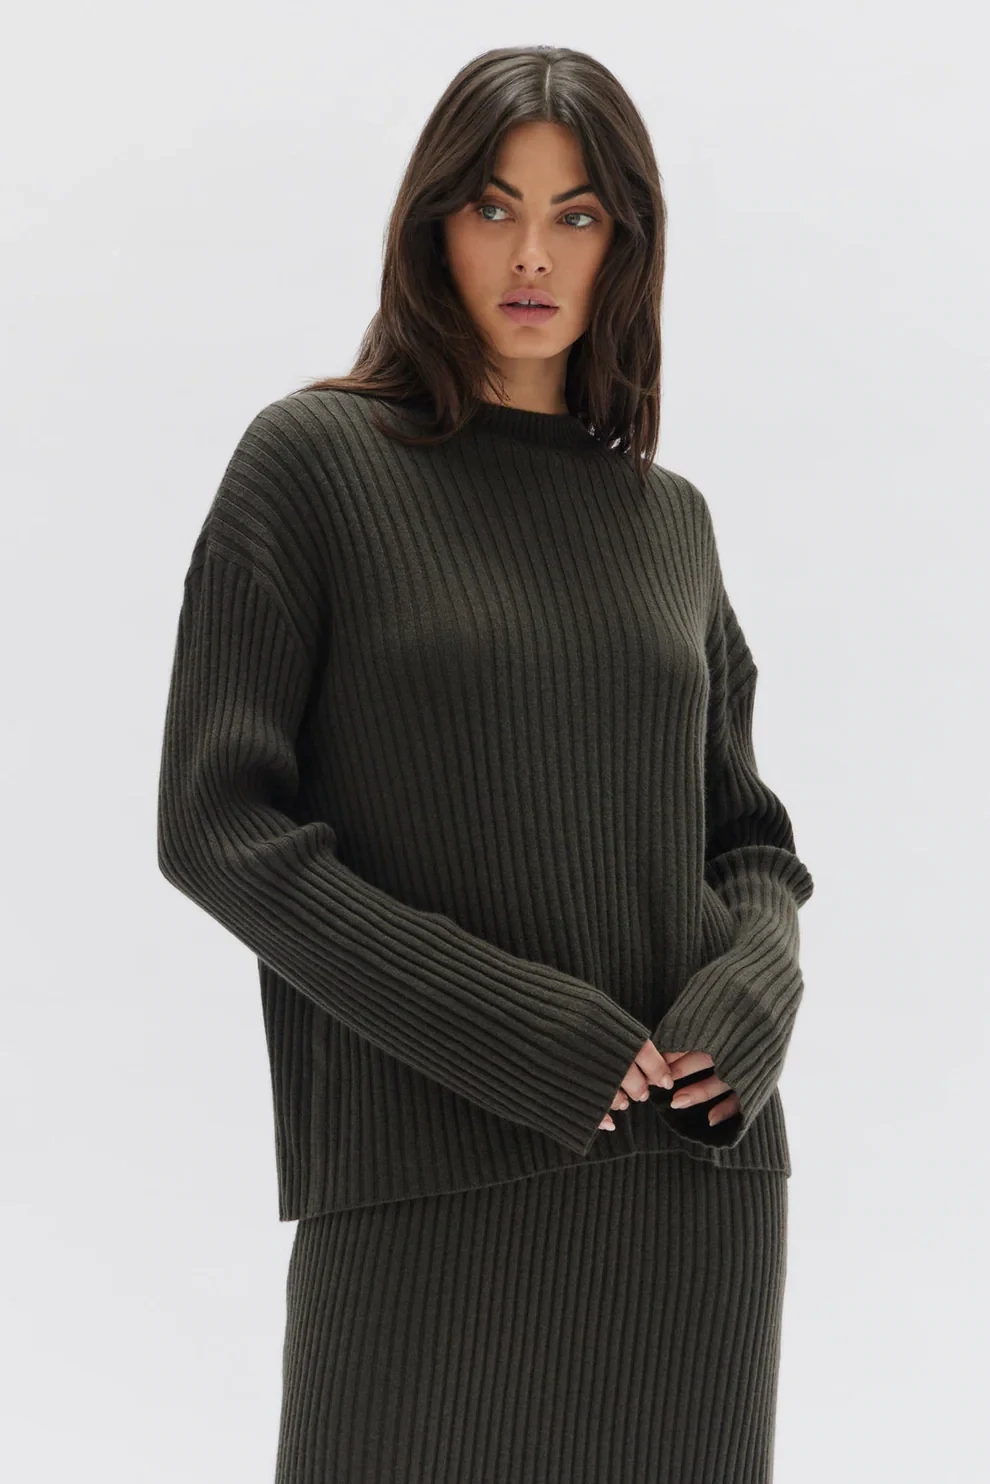 Wool Cashmere Rib Long Sleeve, Size: 8, Colour: Clove